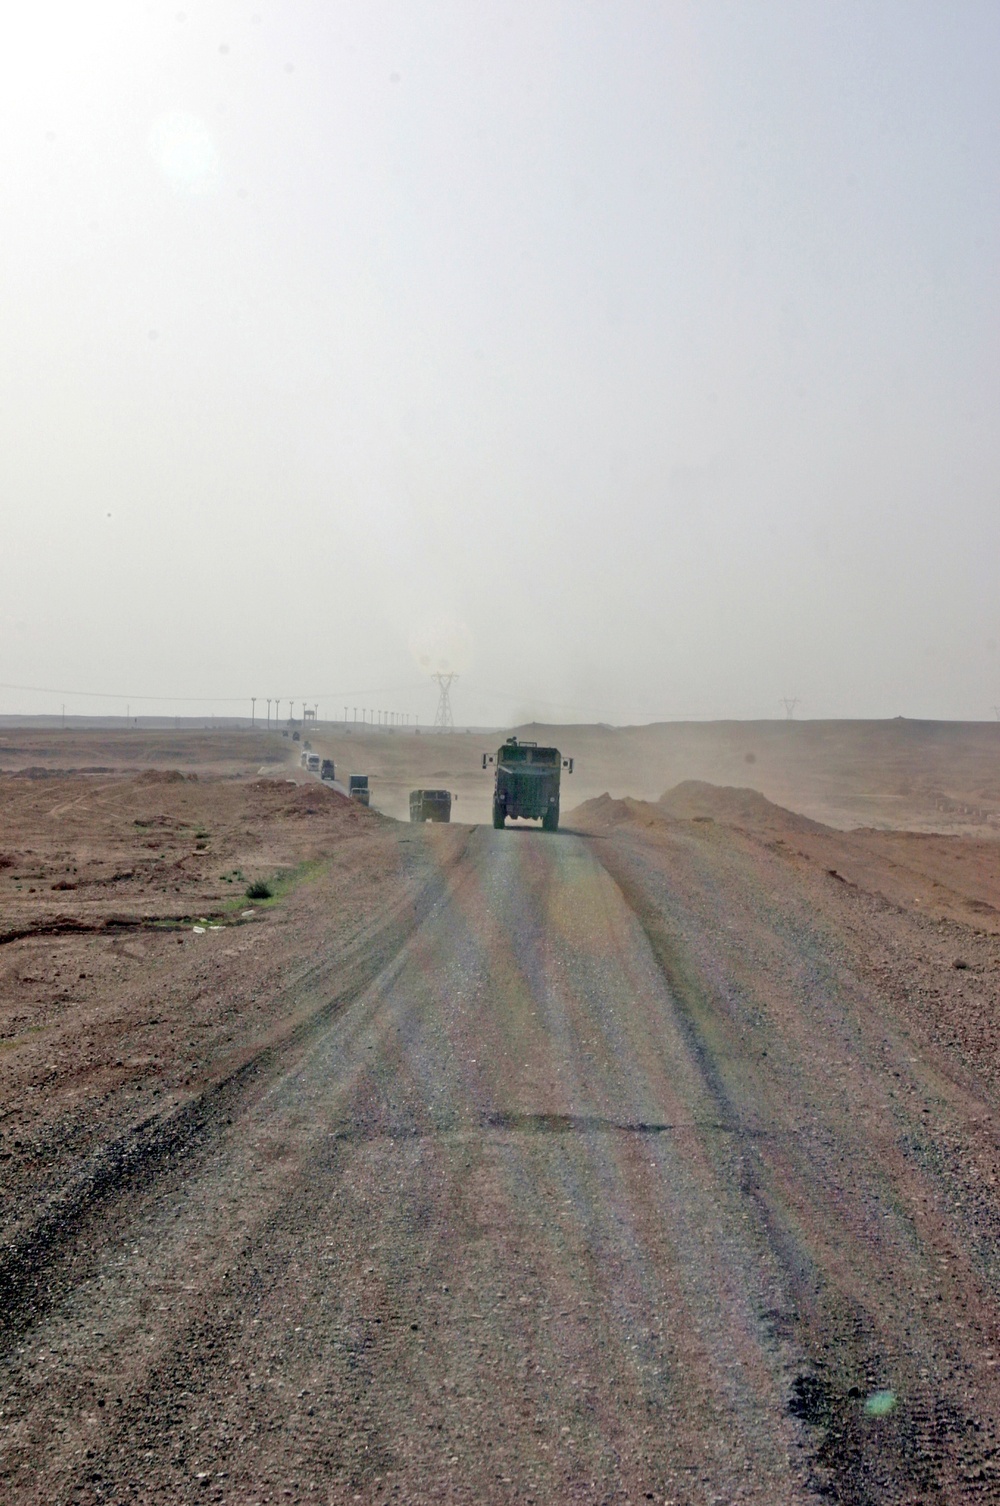 Marines conduct a convoy from Al Asad to Haditha